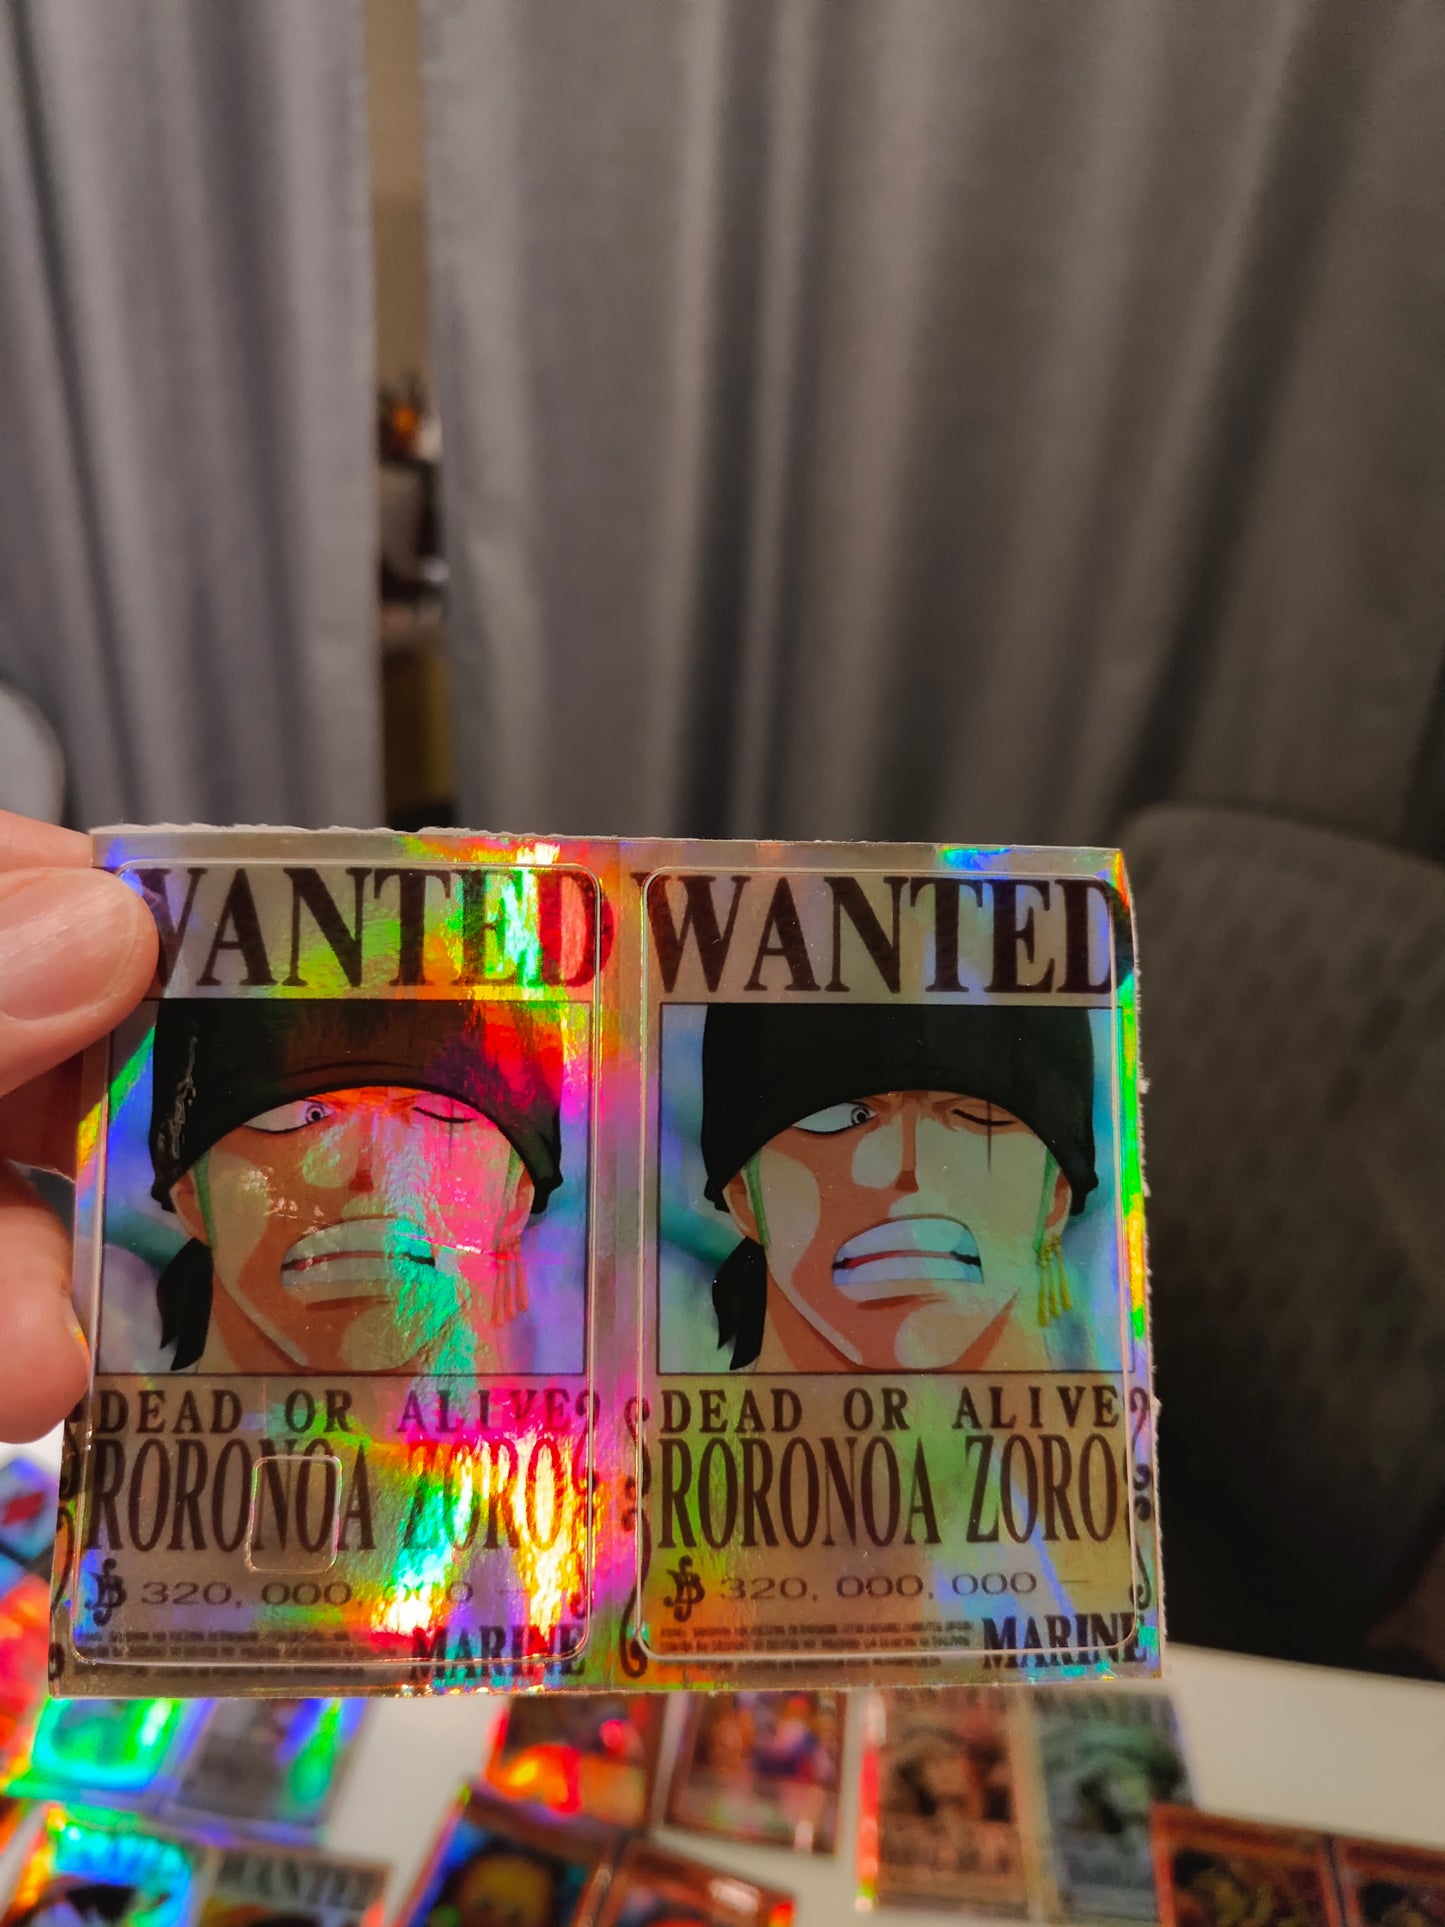 One Piece - Zoro Wanted Poster Holographic Credit Card Sticker (Please Read Description)